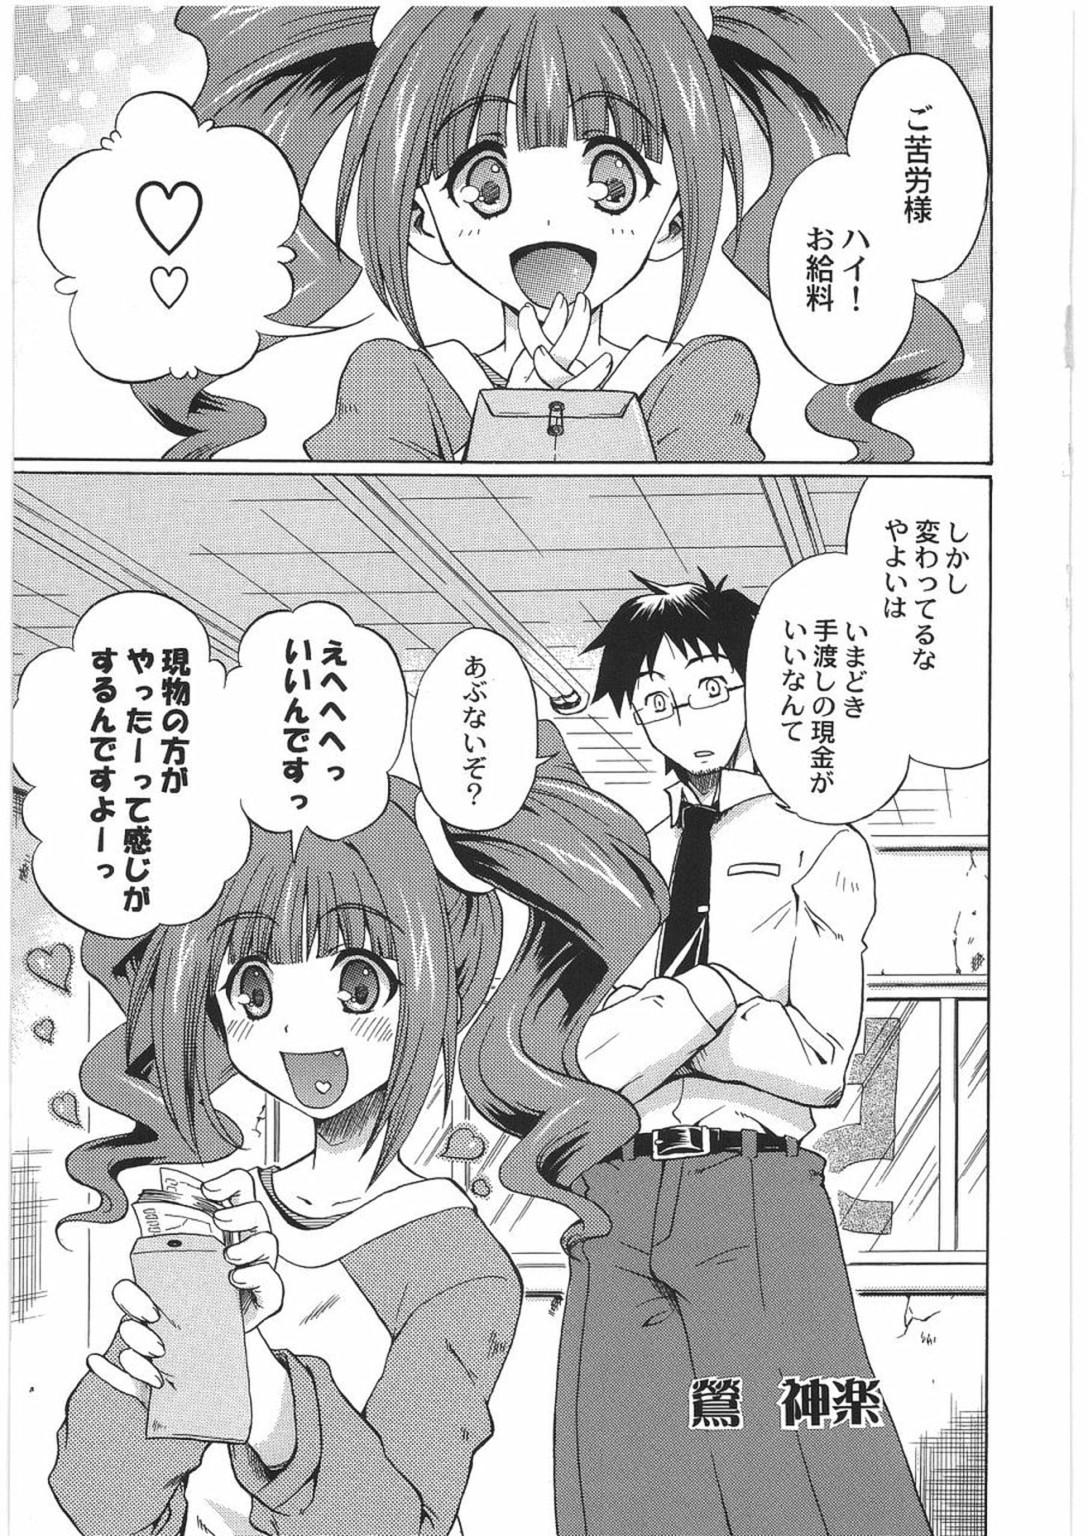 18 Year Old THE IDOLM@STER HEX STRIKE - The idolmaster Couple Sex - Page 4